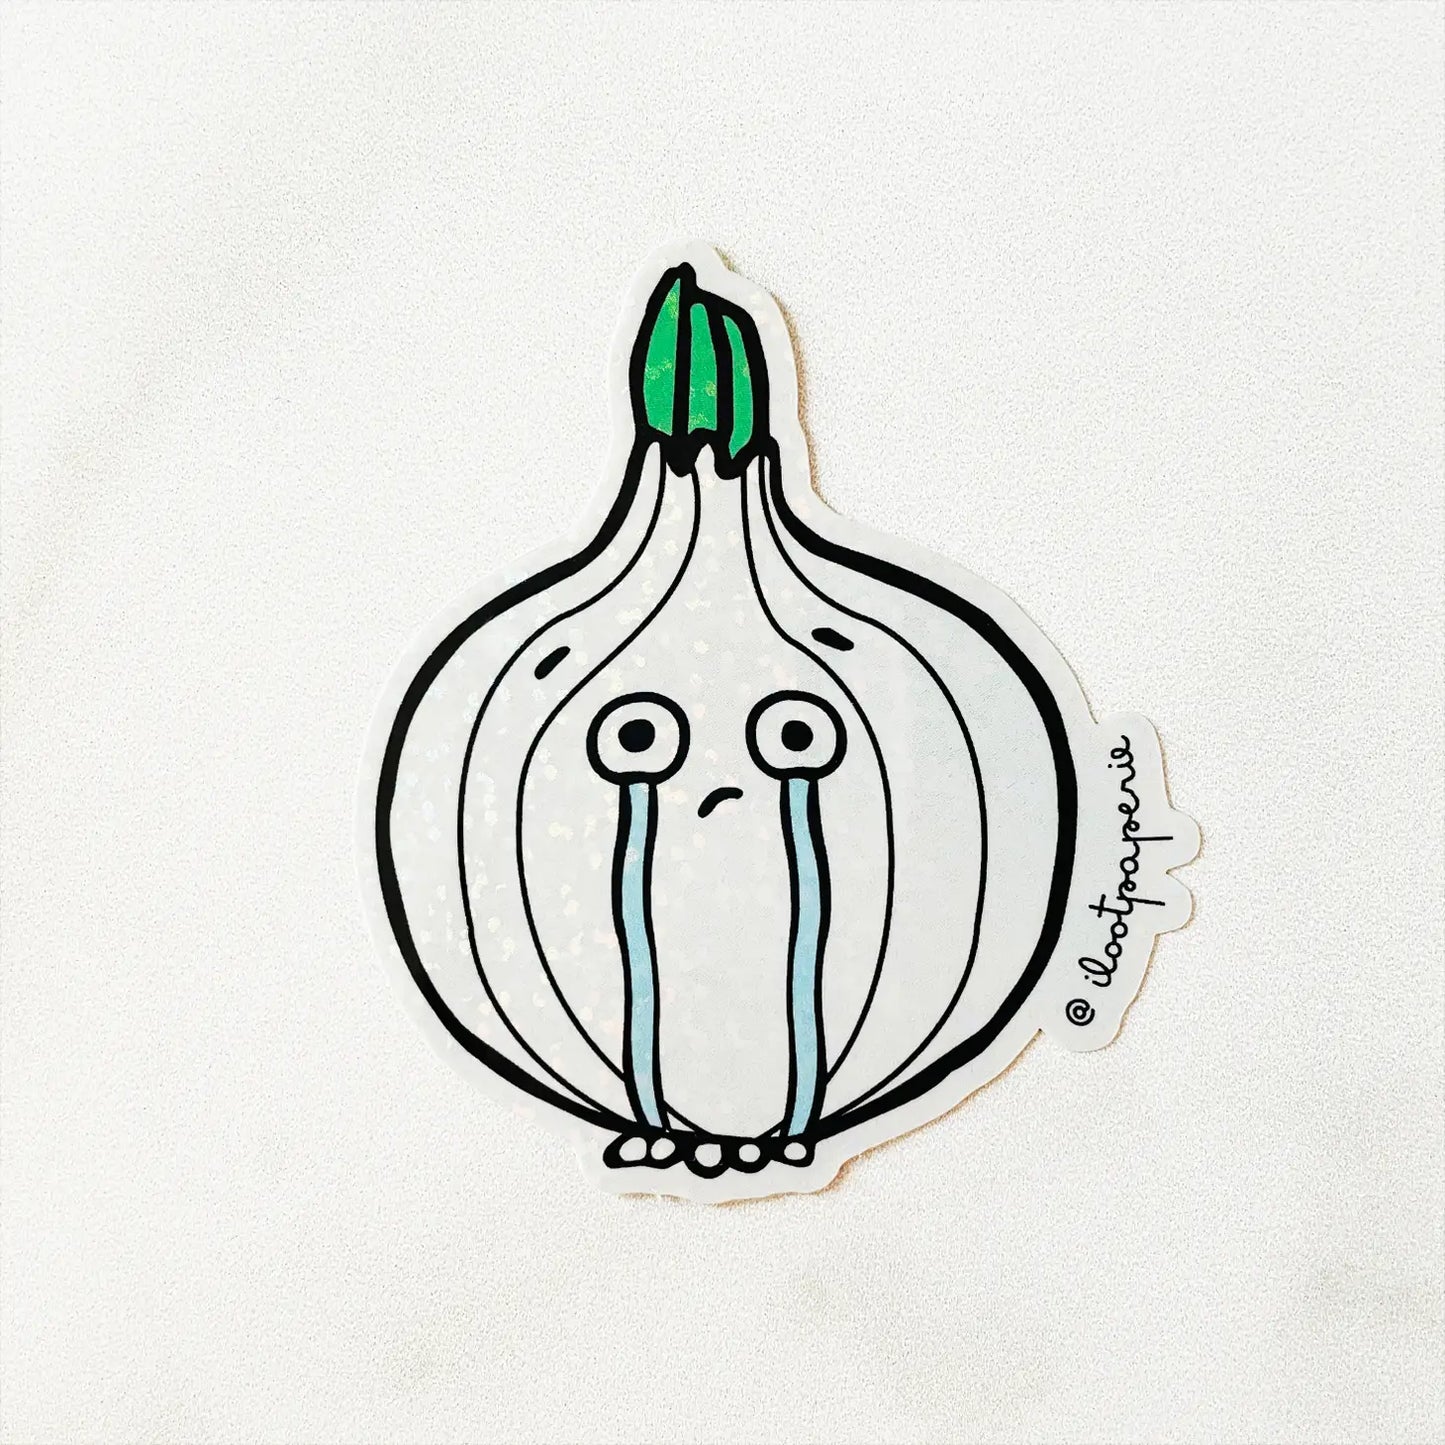 Glittery sticker of a sprouted onion crying. @iIootpaperie